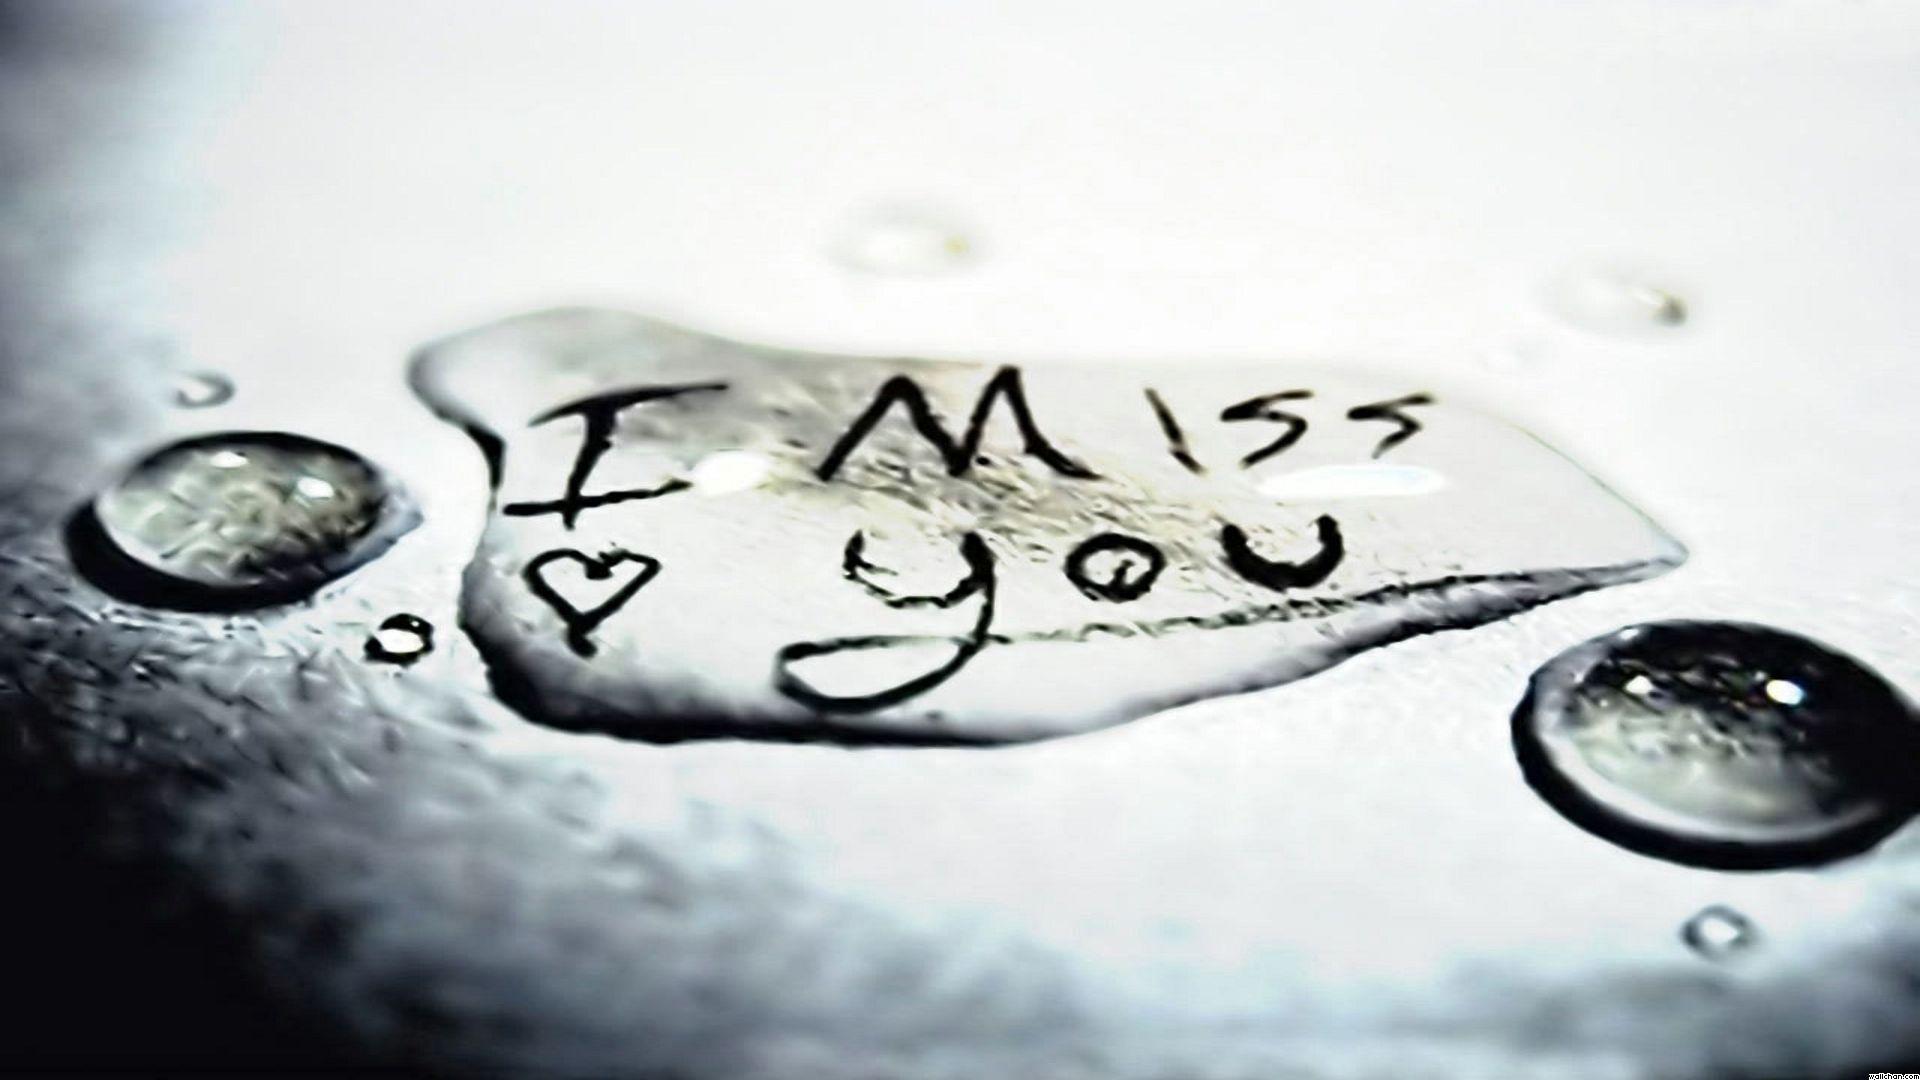 Download Missing You Wallpaper Gallery